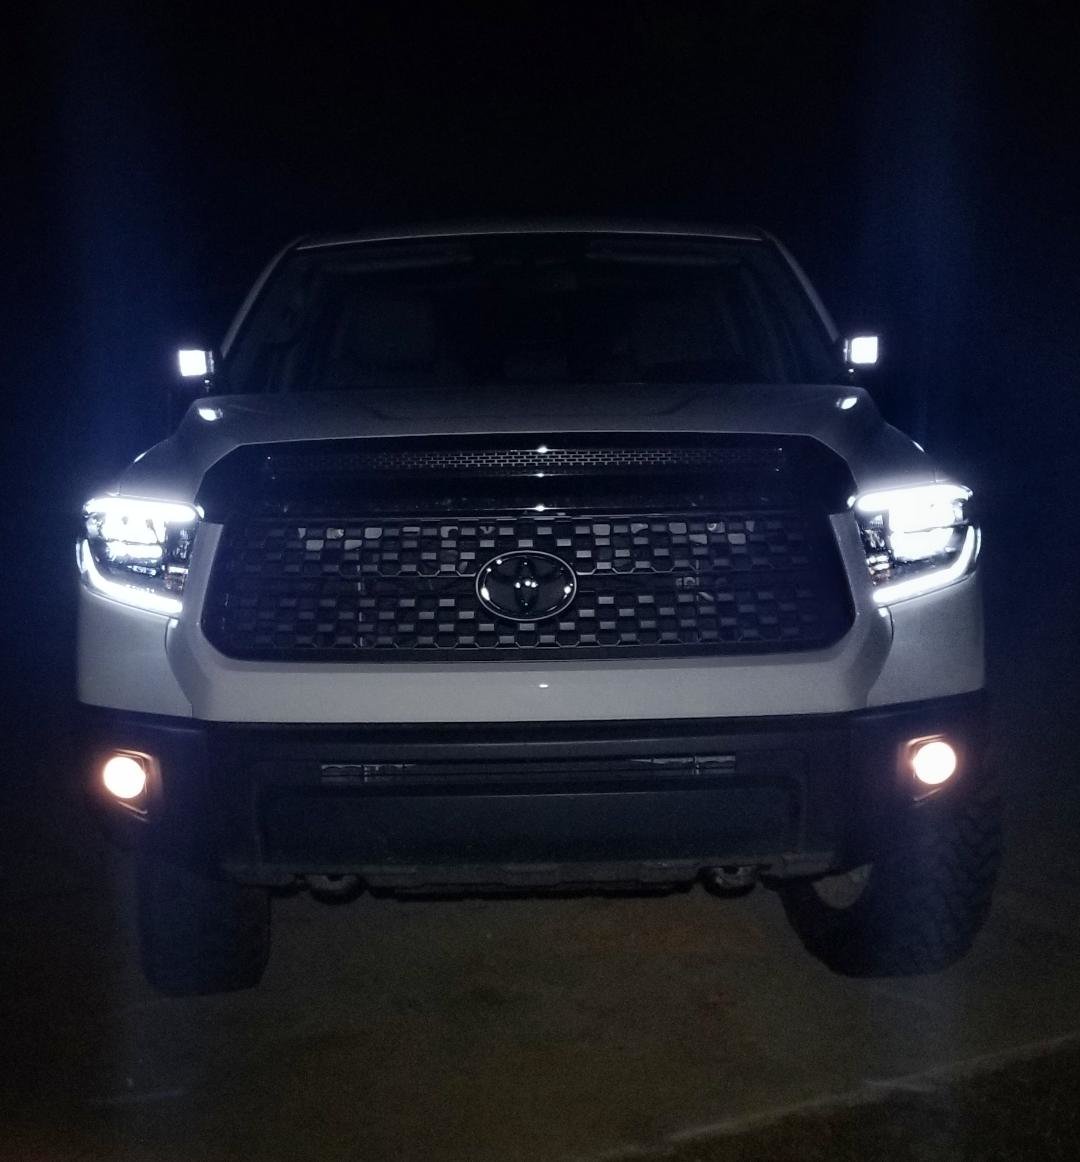 tundra new grill and lights at night.jpg